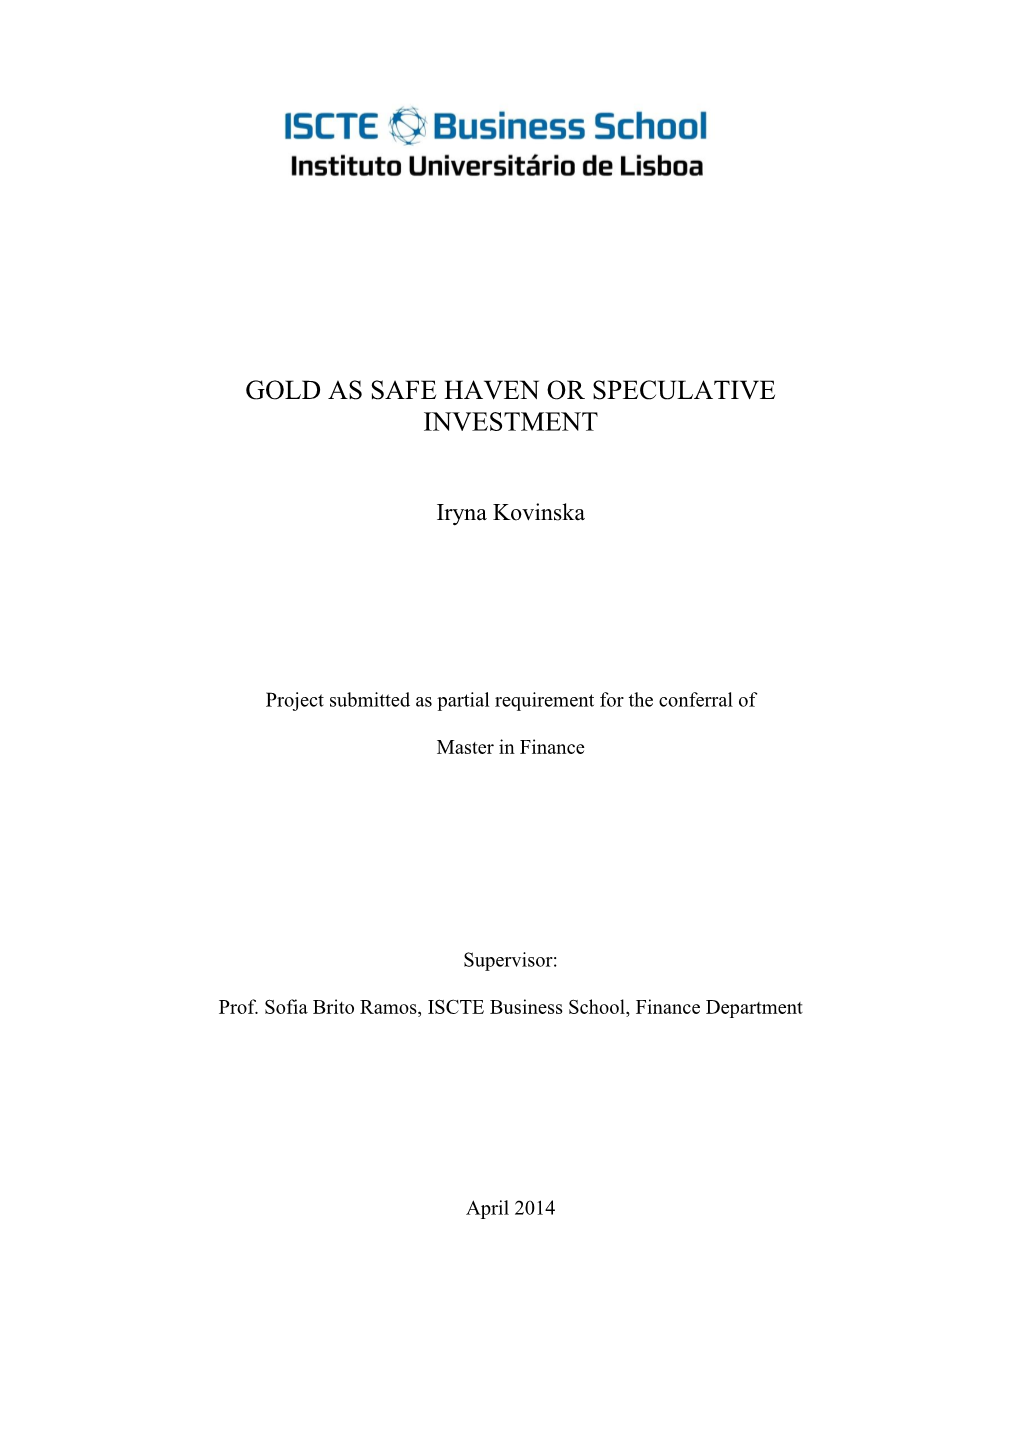 Gold As Safe Haven Or Speculative Investment